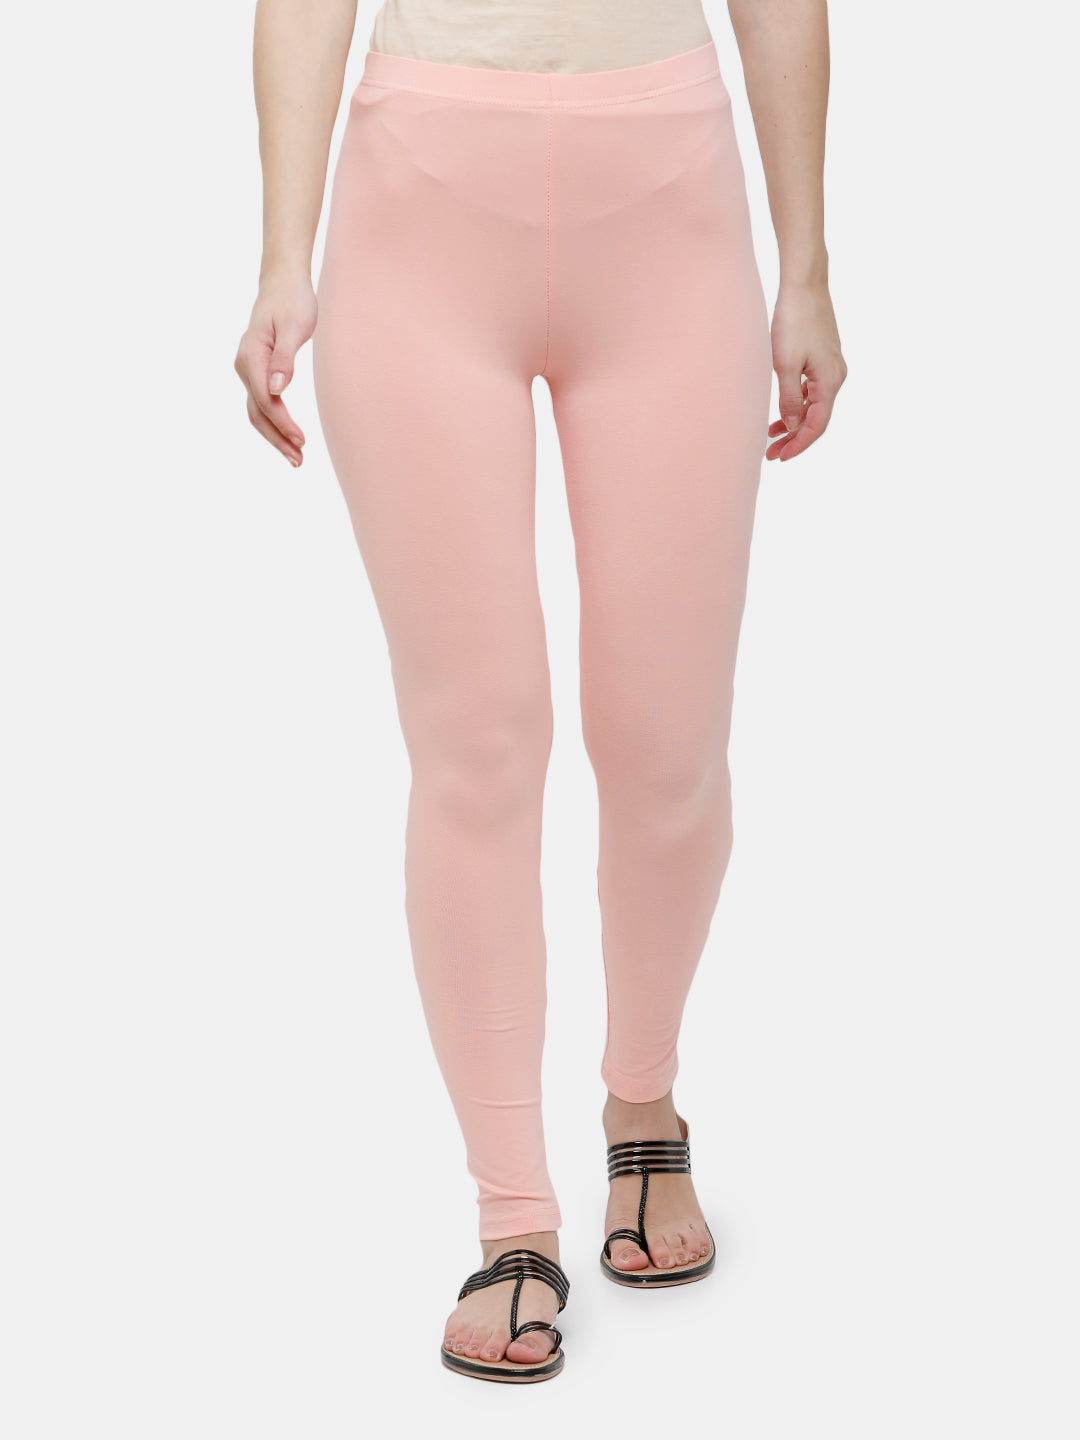 Pastel Pink Women's Casual Leggings, Solid Color Pink Polyester Brushed  Suede Soft Tights, Made in USA, Size: XS-2XL | Heidikimurart Limited